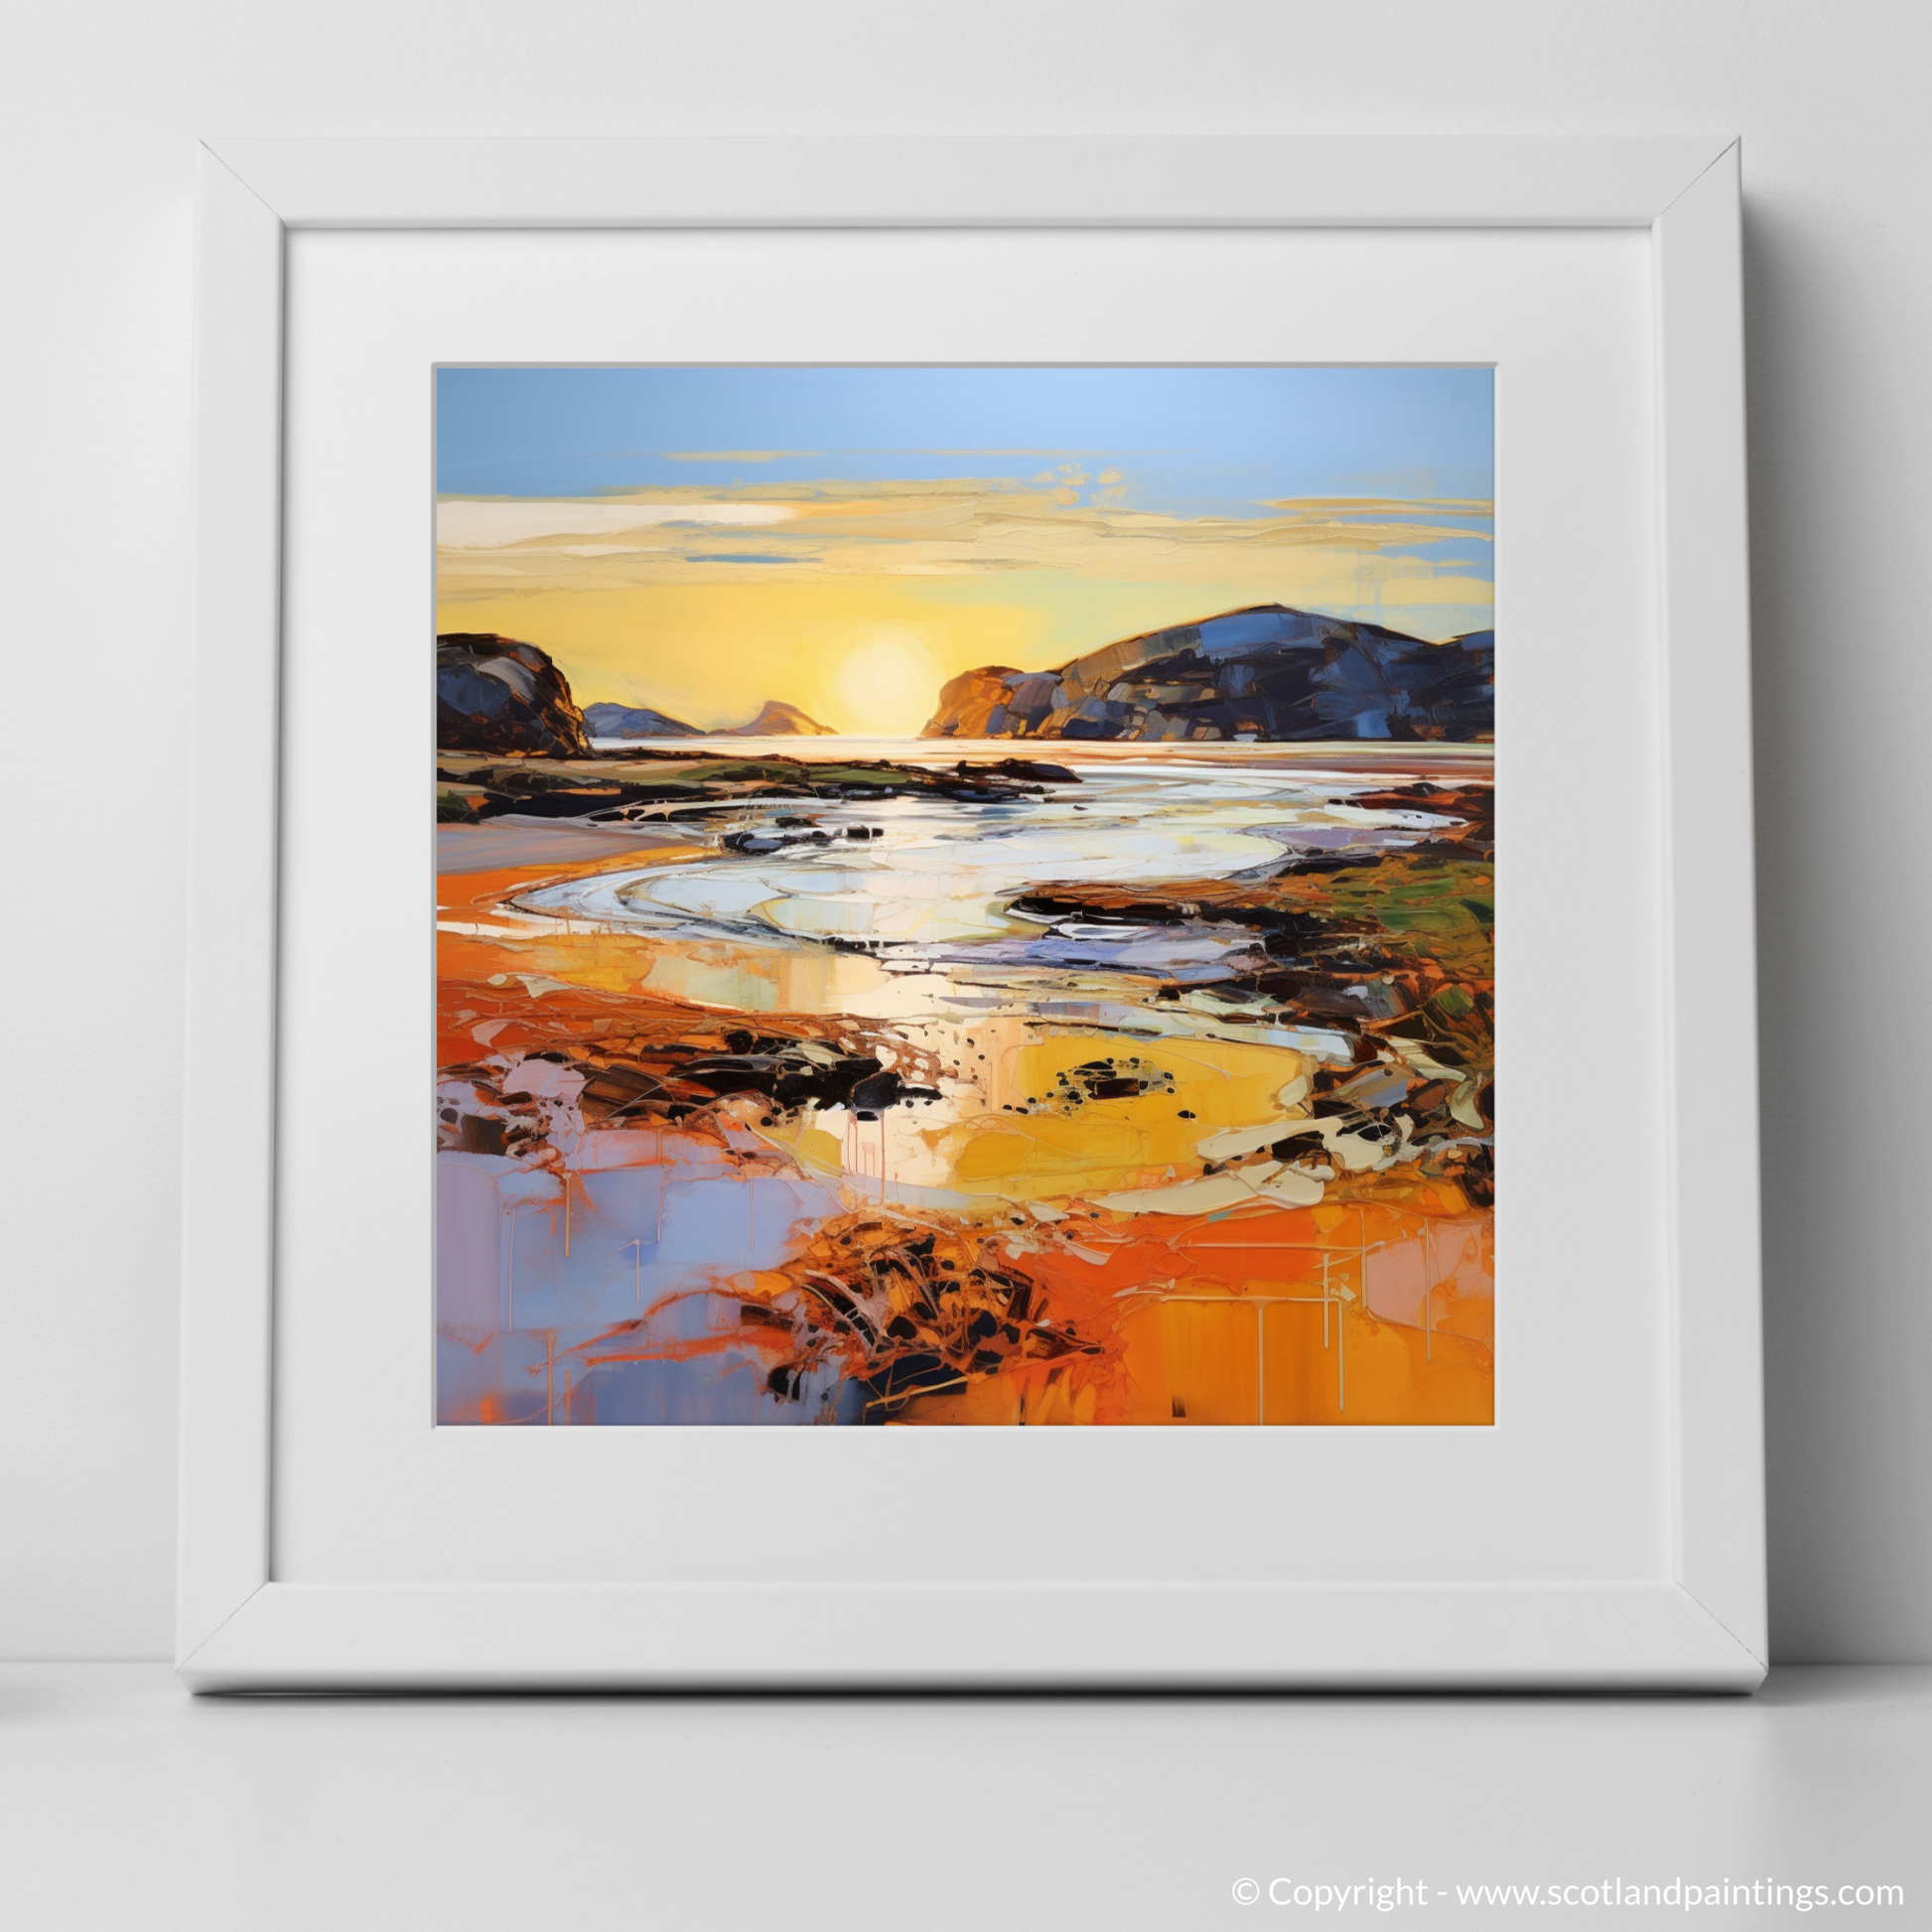 Art Print of Kiloran Bay at golden hour with a white frame